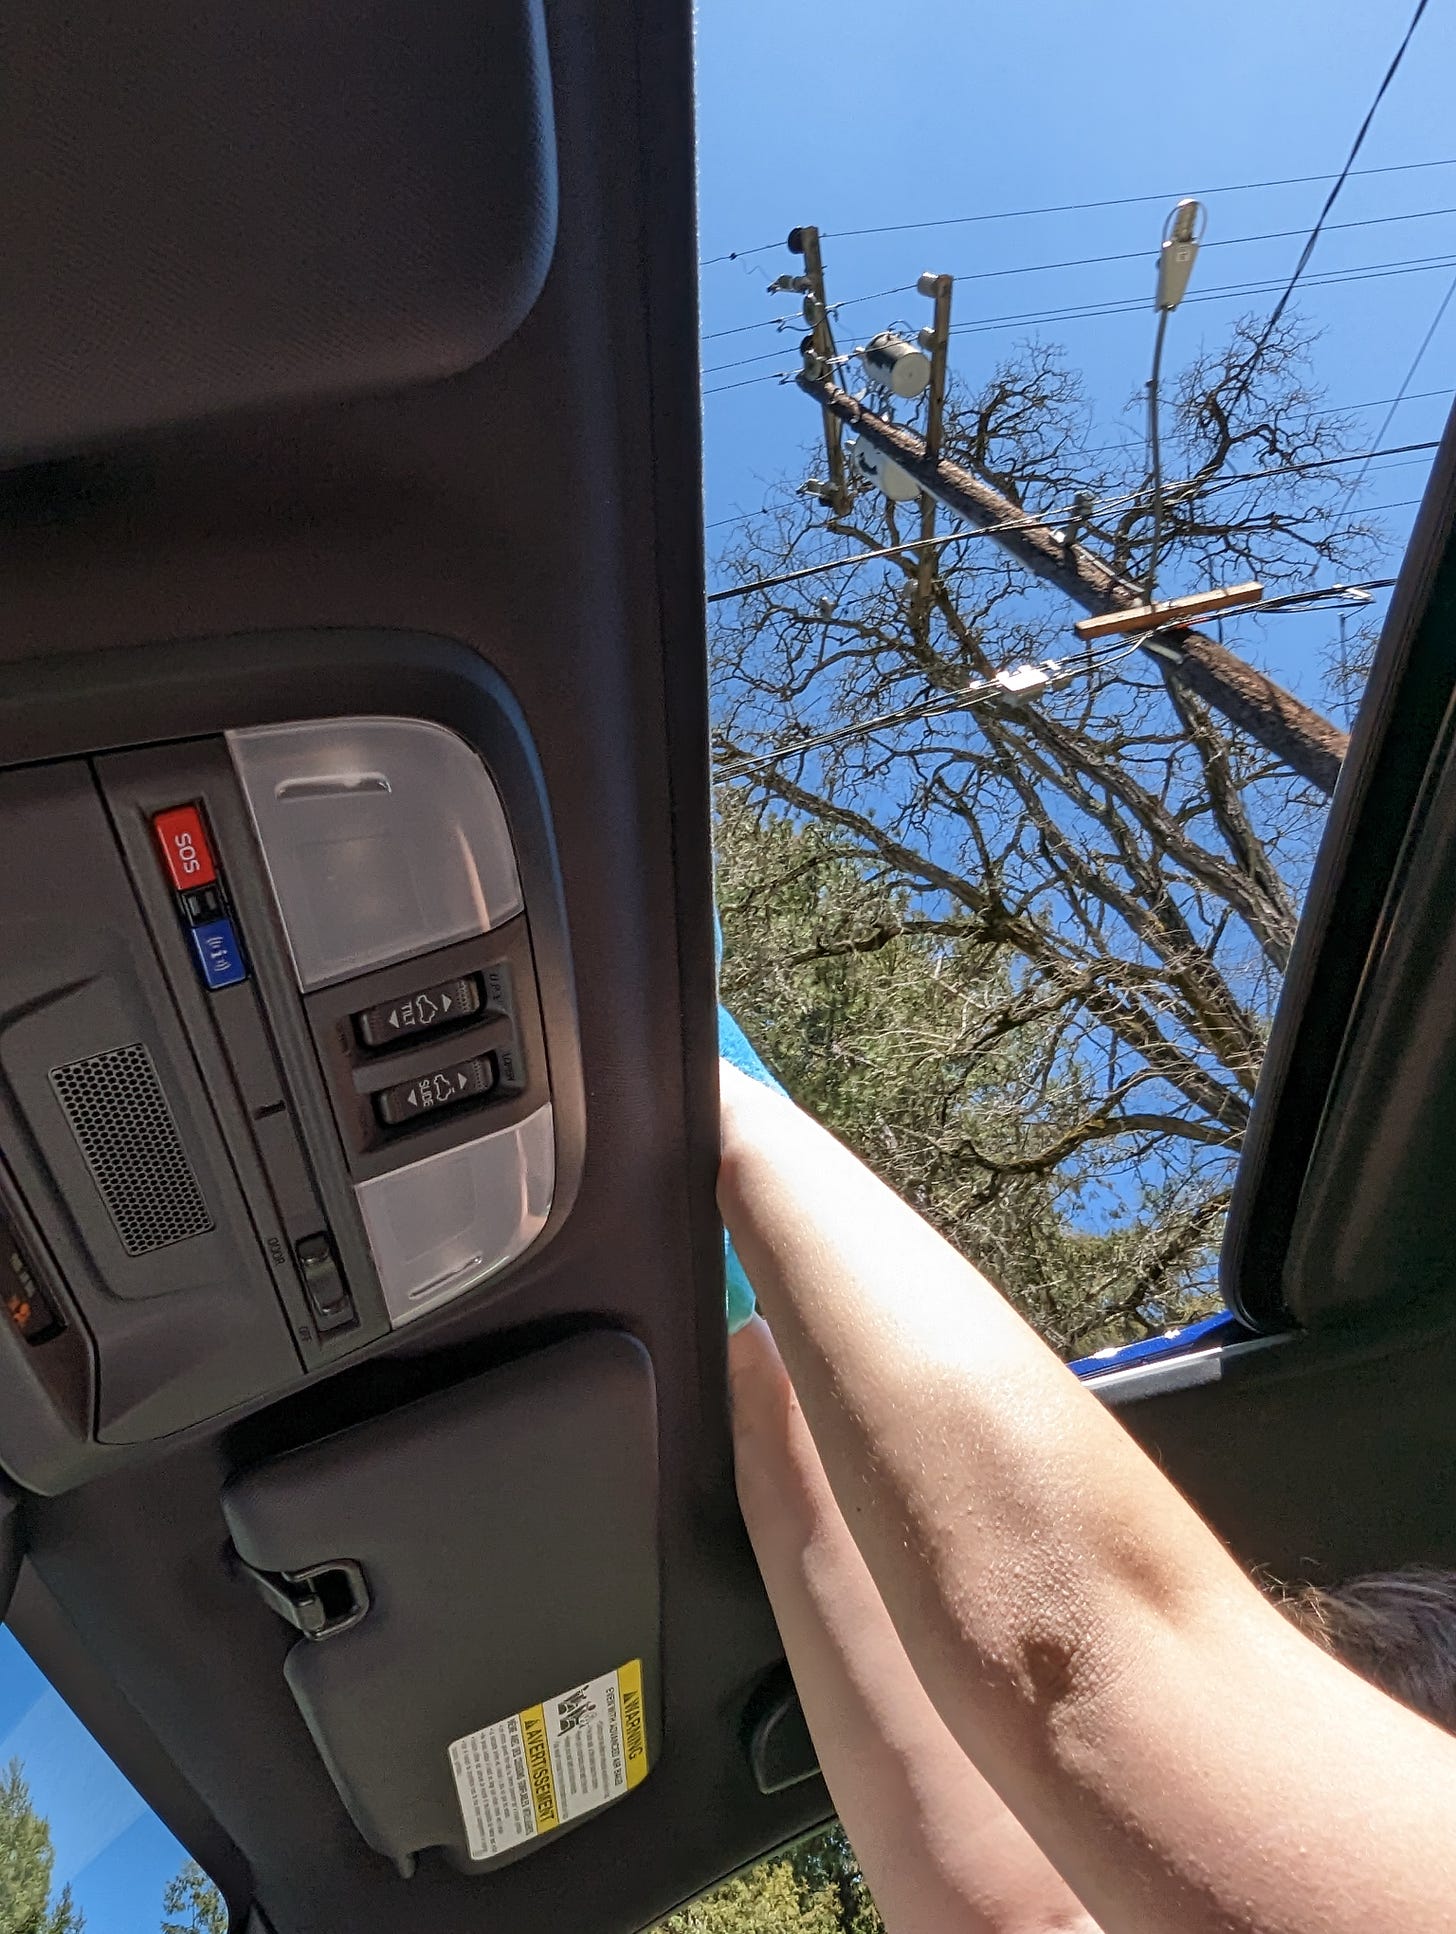 photo from inside a car showing a pair of arms reaching above and through the sunroof with a tiny bit of blue stuffed animal showing